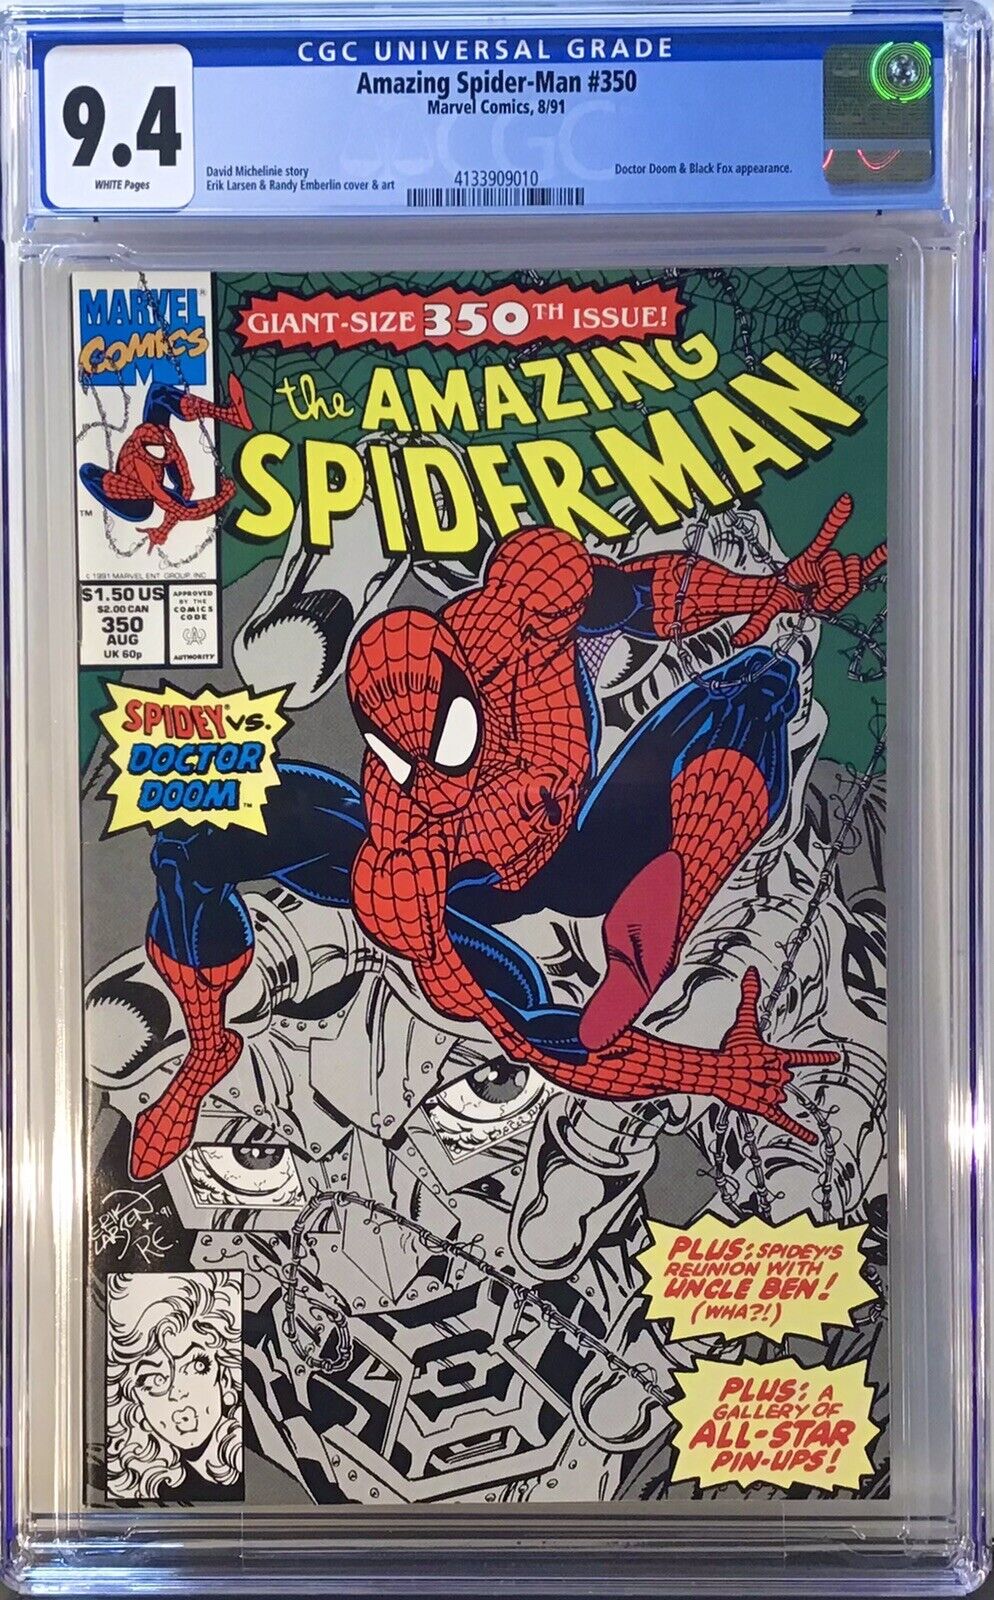 Amazing Spiderman #350 Giant Size Issue CGC 9.4 ( 1991 )cover art by Eric Larson